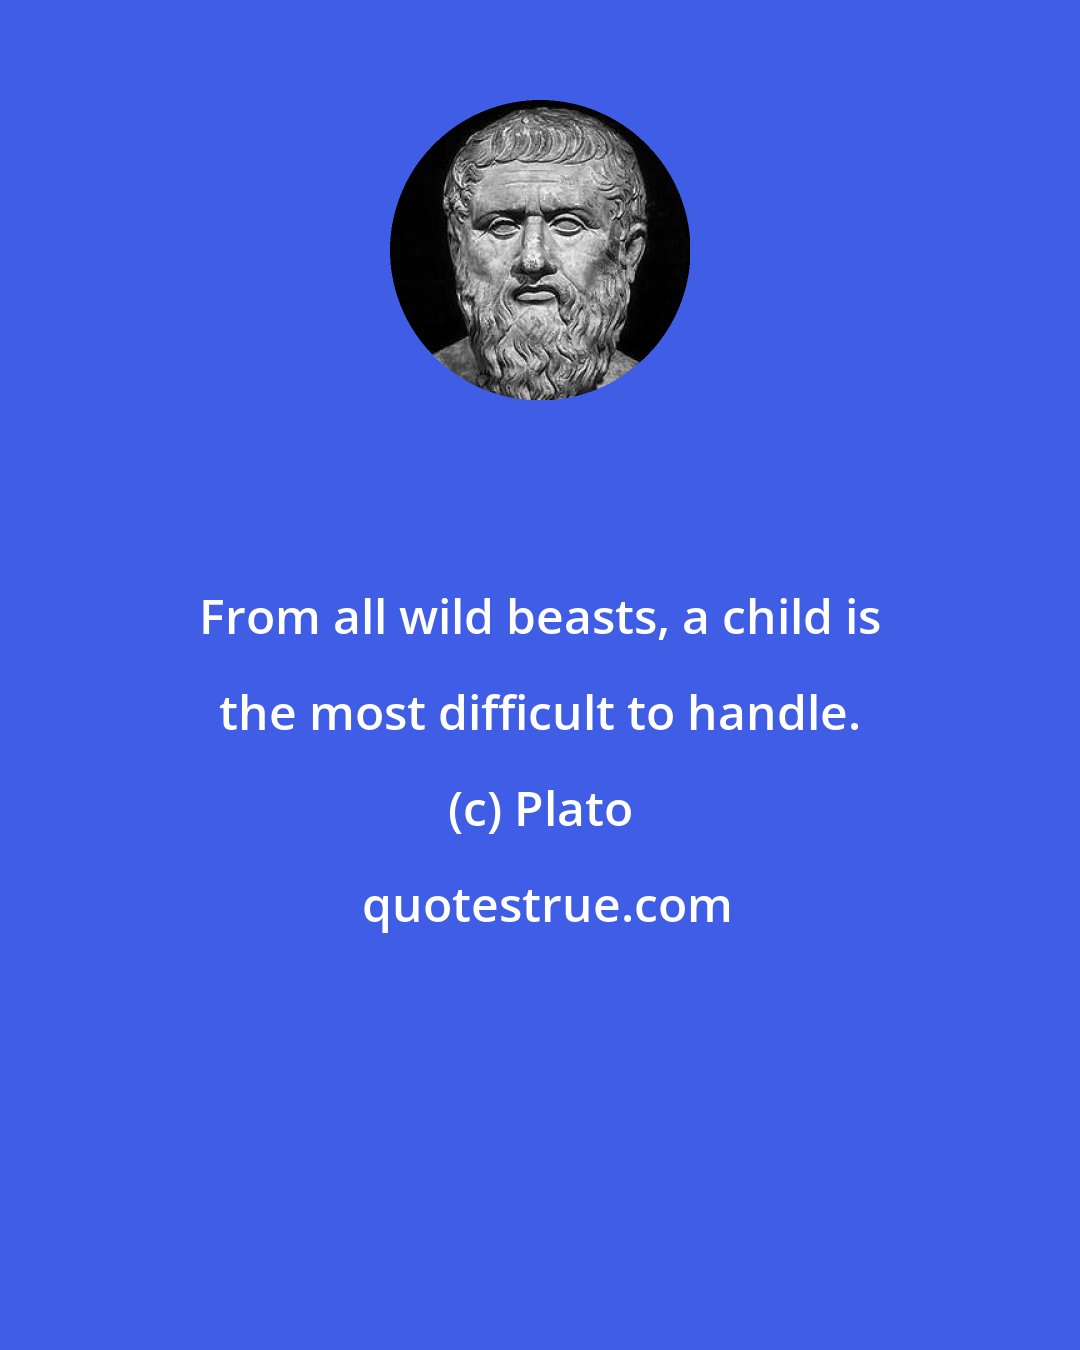 Plato: From all wild beasts, a child is the most difficult to handle.